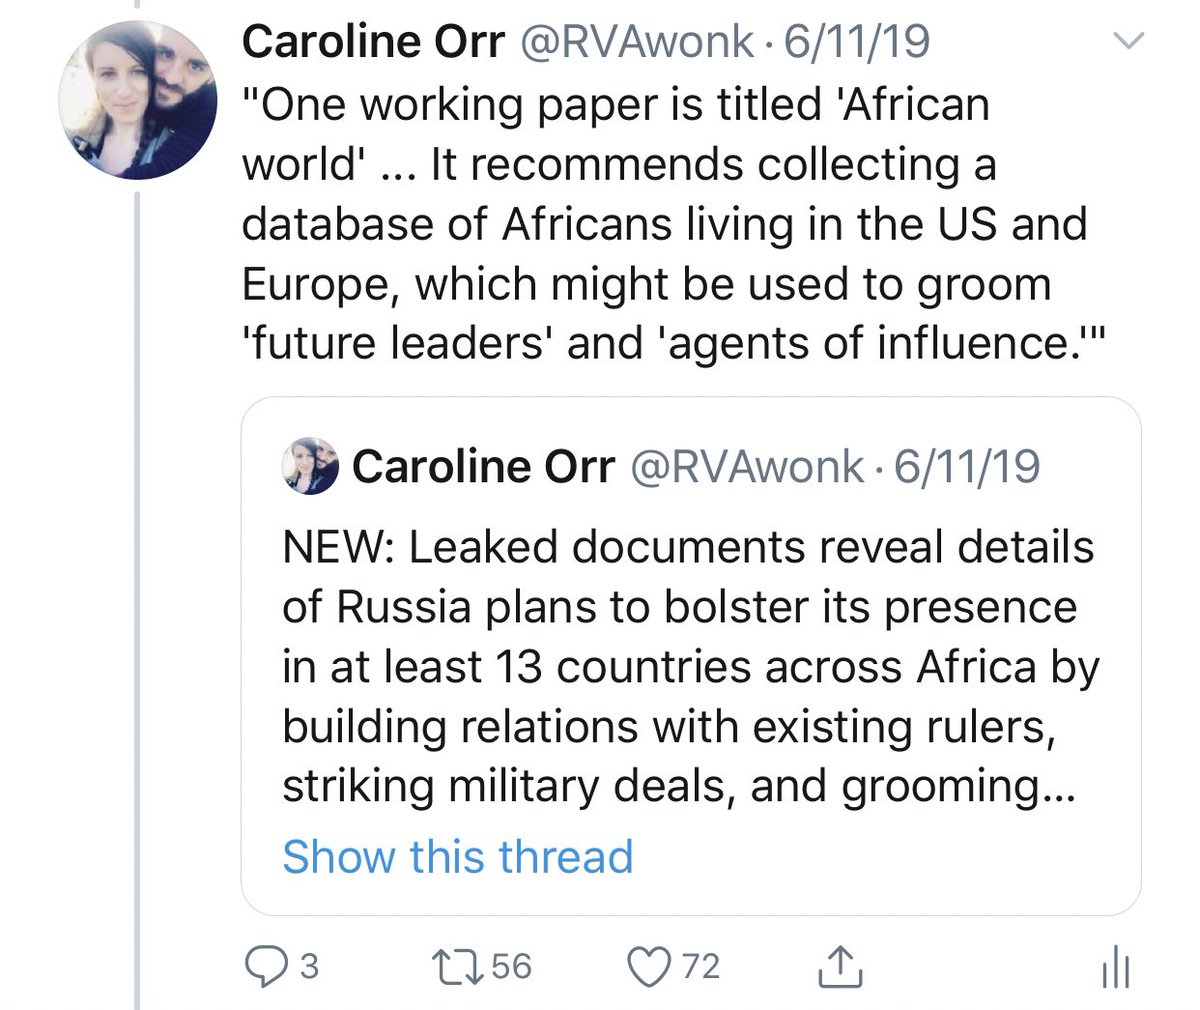 And although it’s too early to say anything conclusive about this, it seems pertinent to mention that Russia has been pouring resources into this space, seeking to gain influence in Africa while also exploiting existing racial tensions in the US to further Moscow’s own interests.